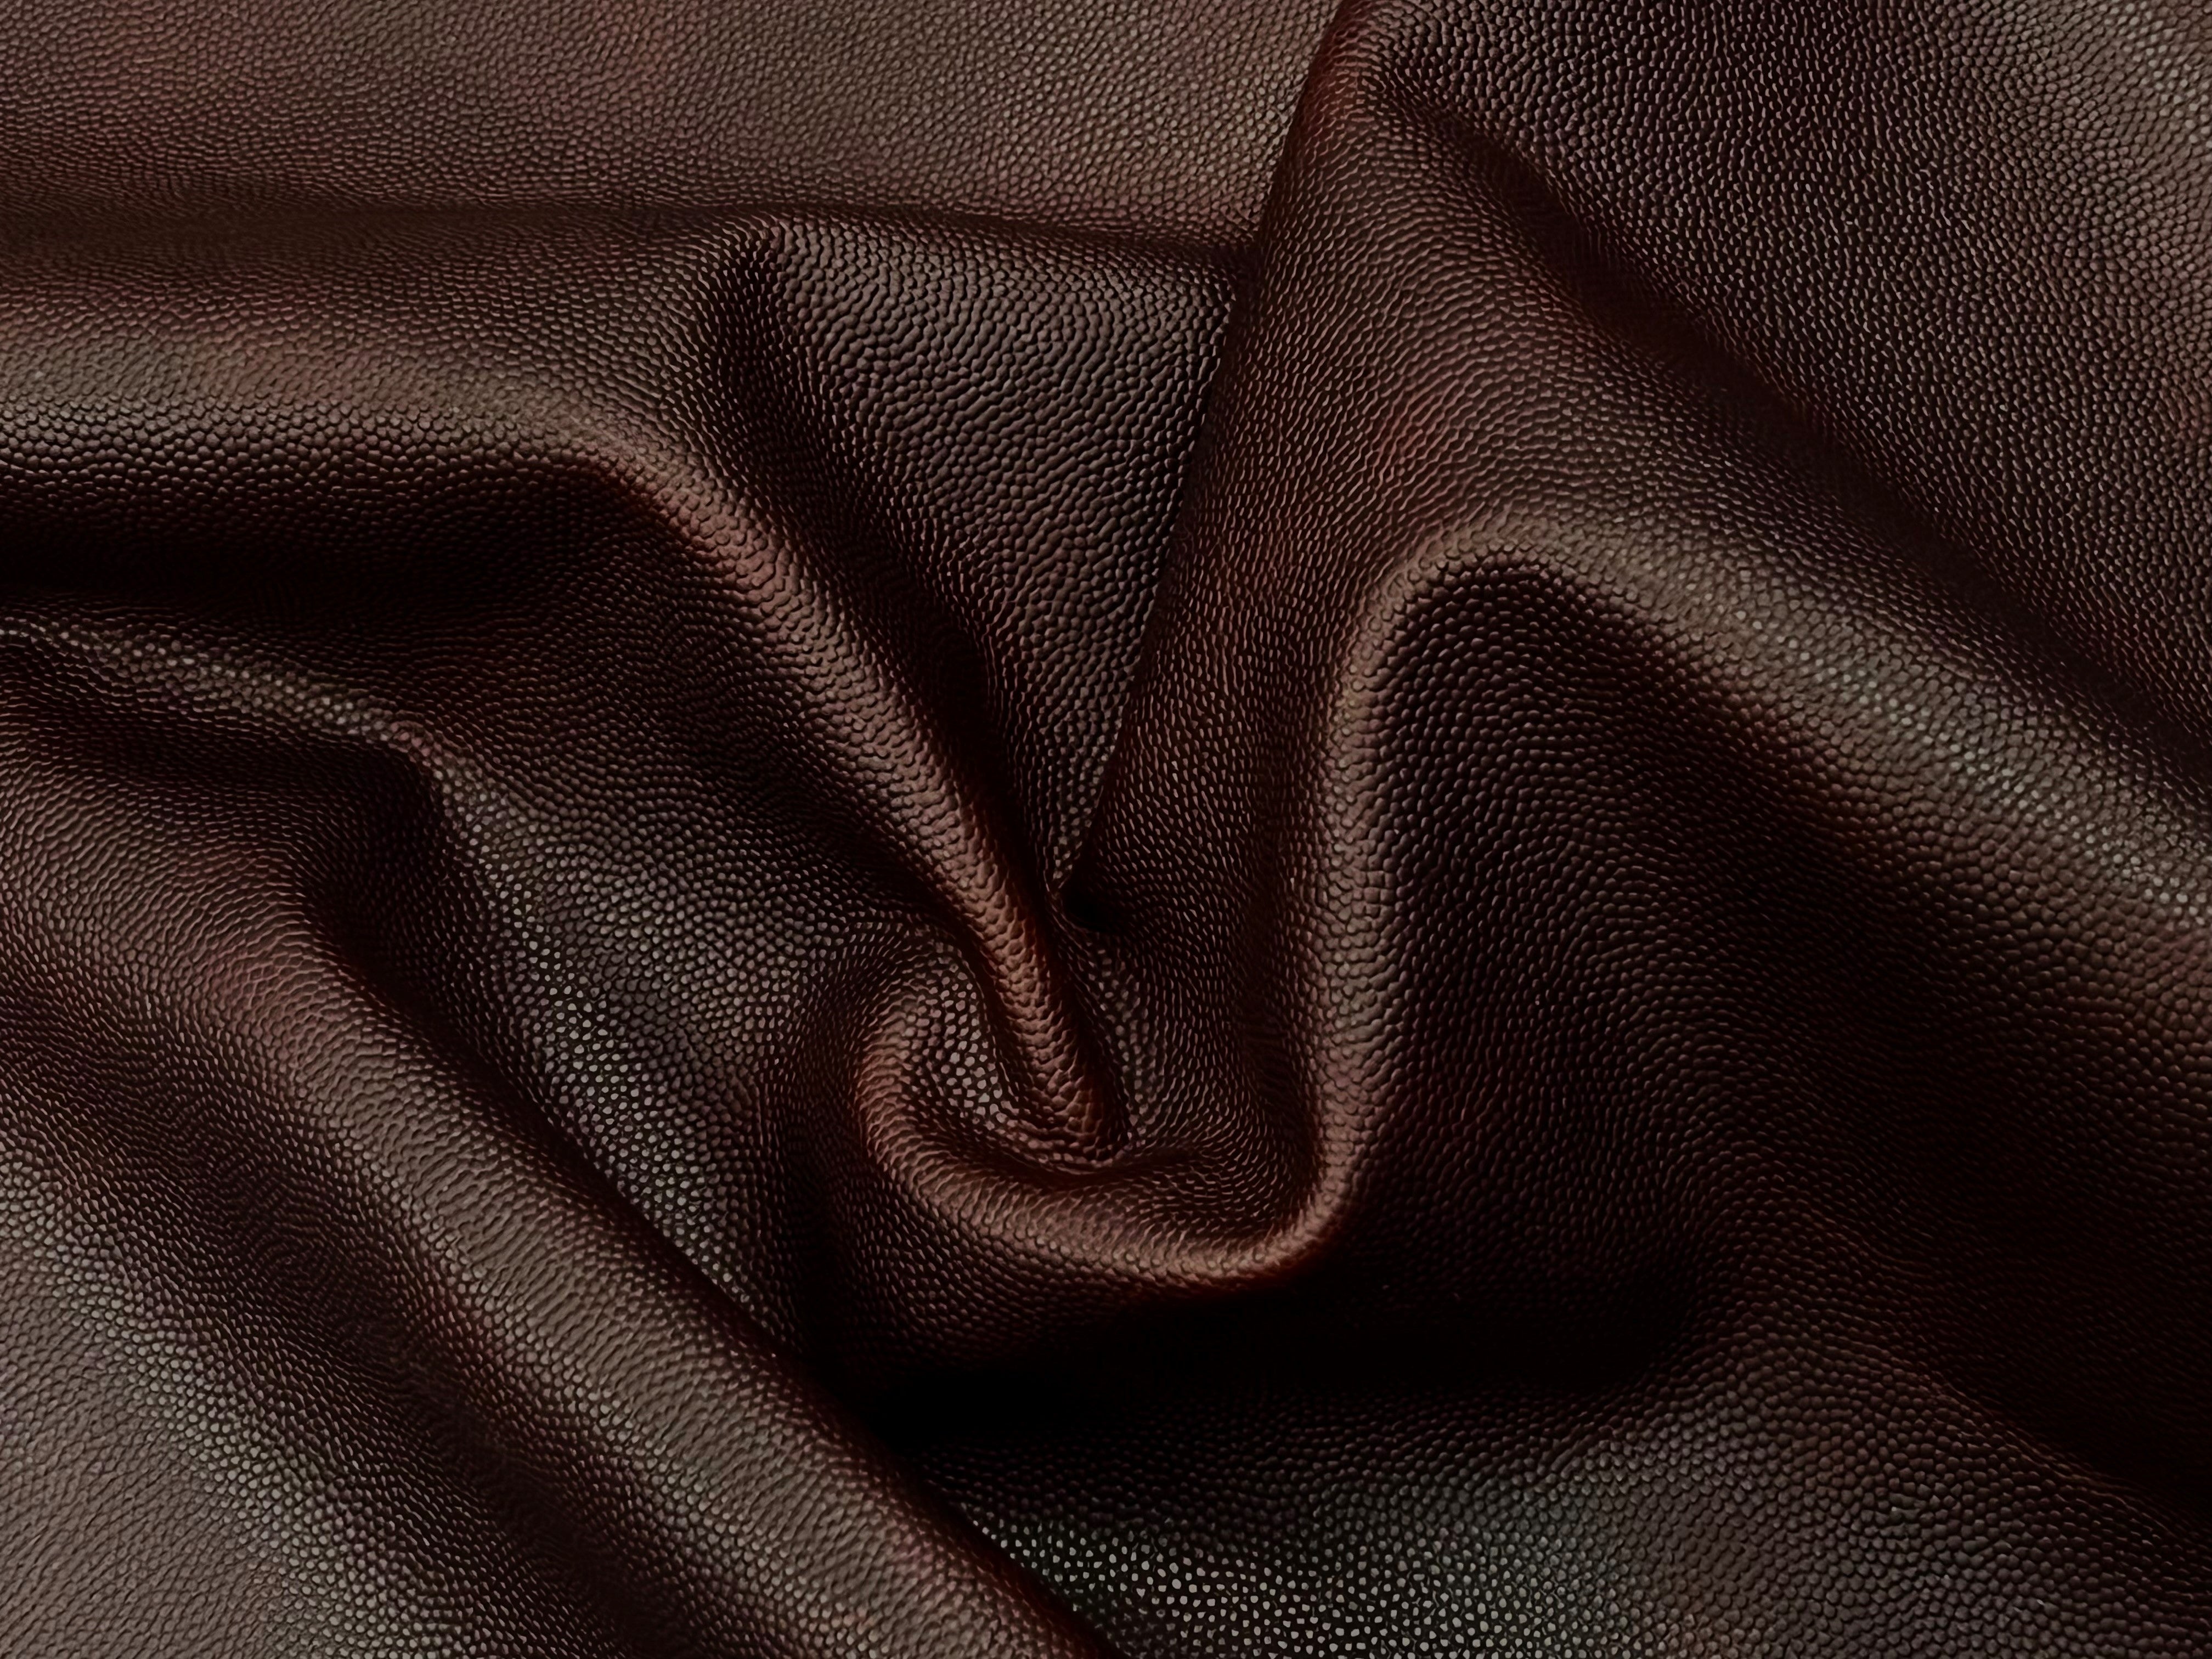 Bourbon Caramelo, Semi-Firm Printed Grain Two Toned Brown Leather Cow Side : 1.4-1.6mm (Ex Pittards Stock)